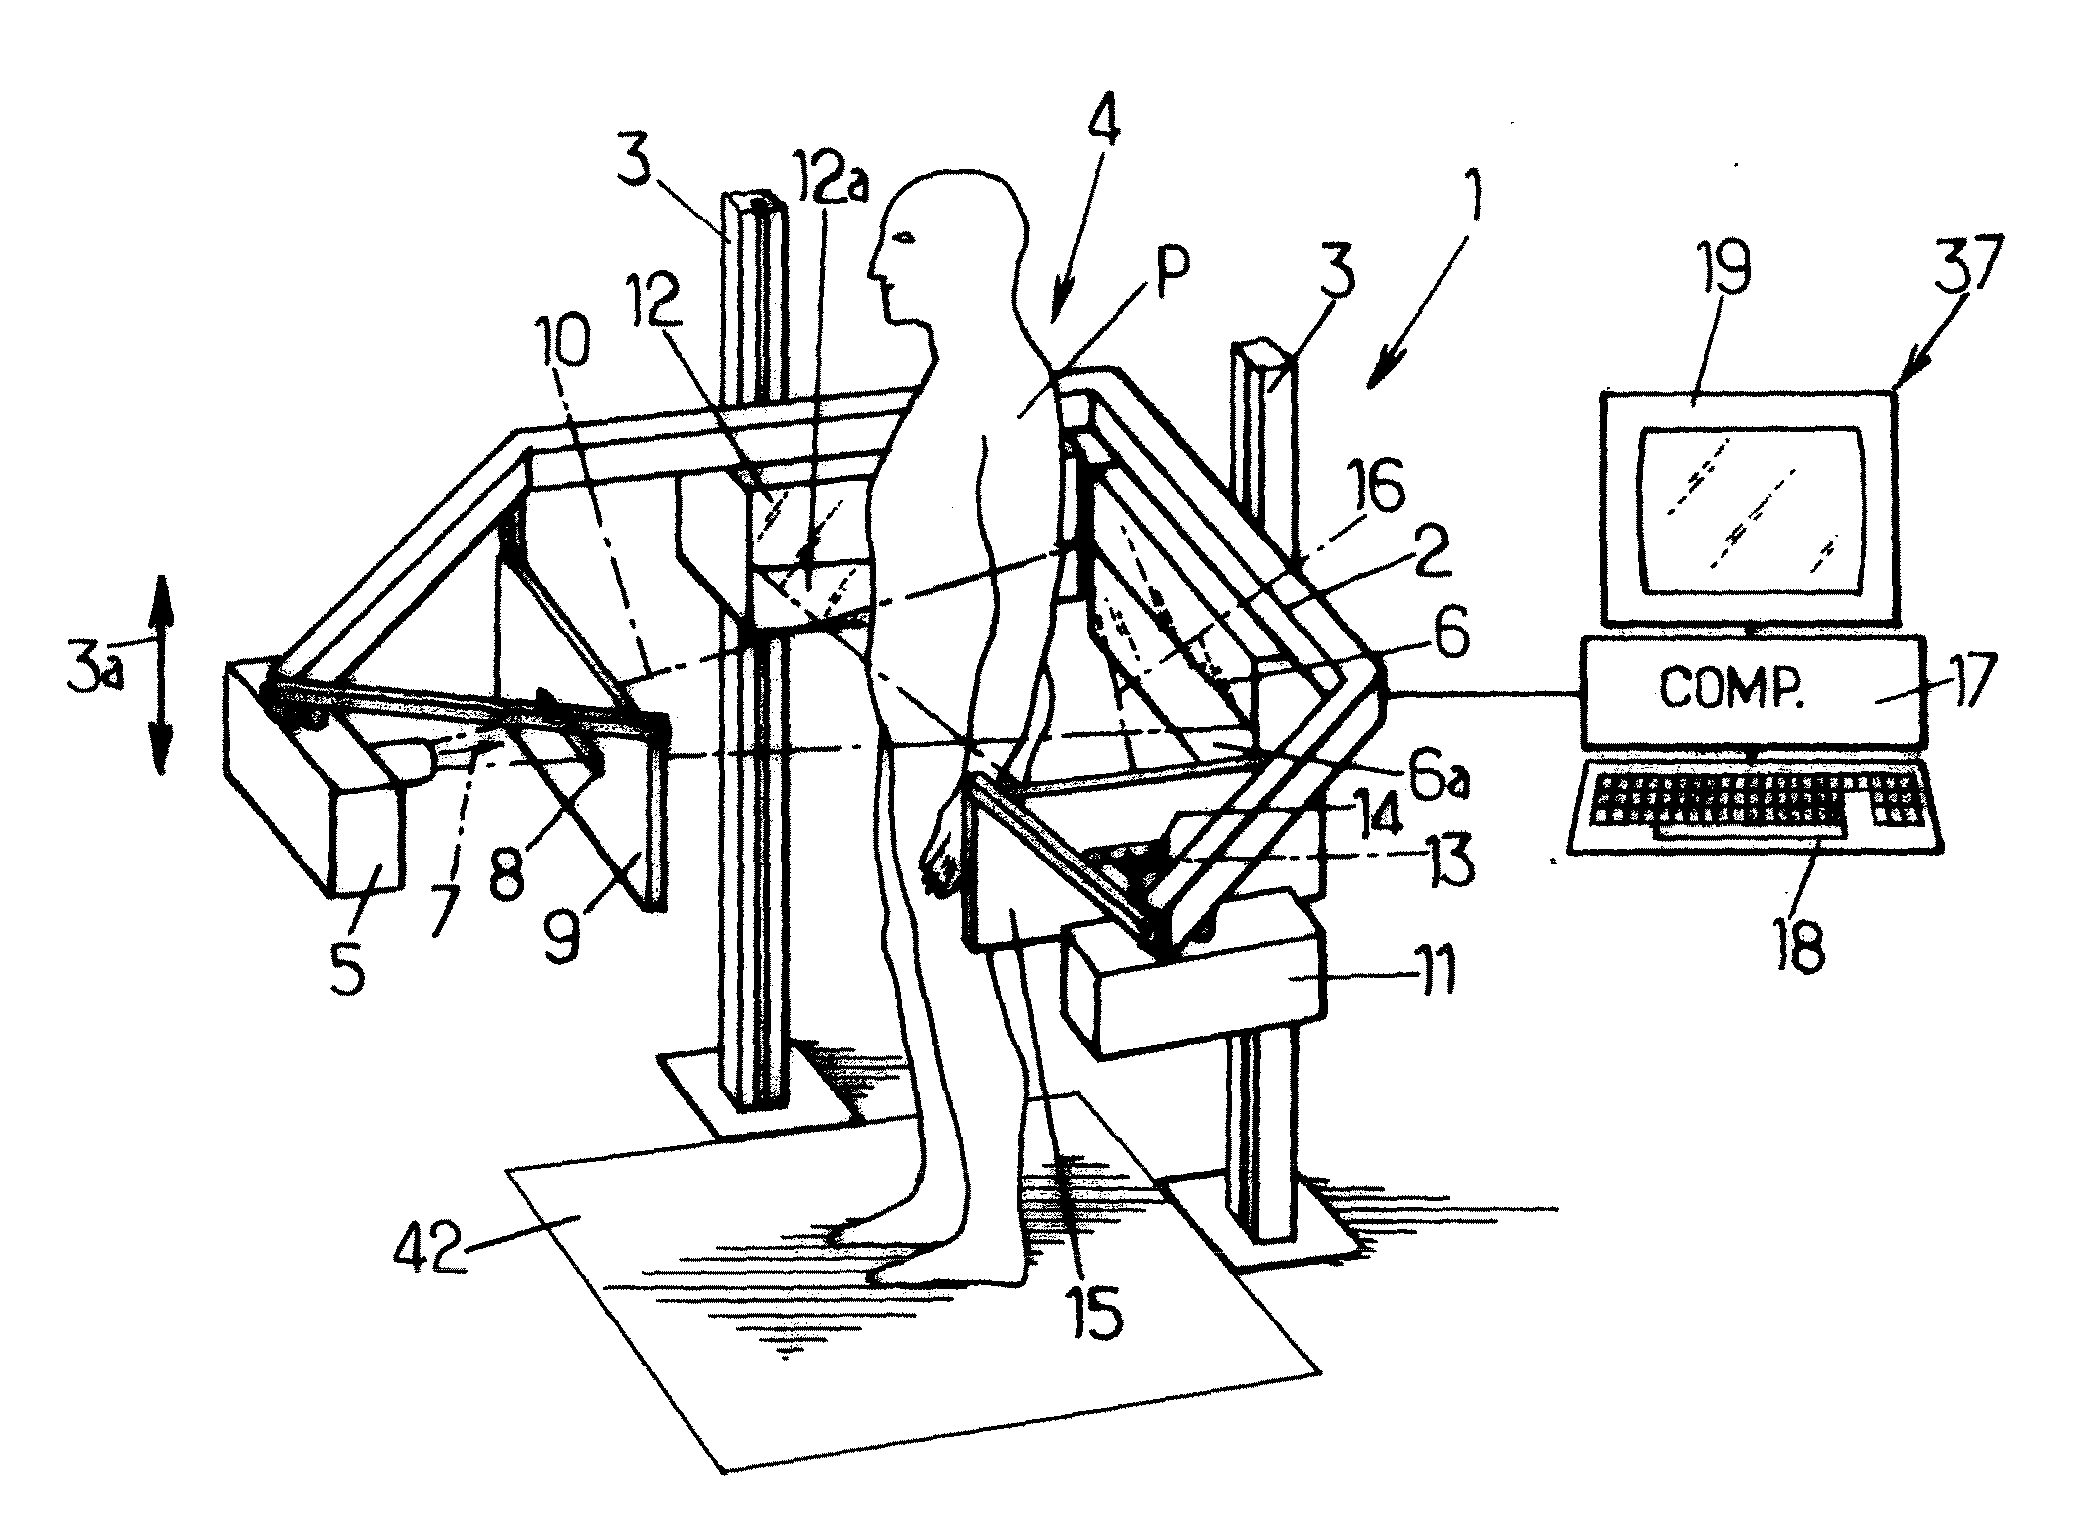 Medical imaging method and system for providing a finite-element model